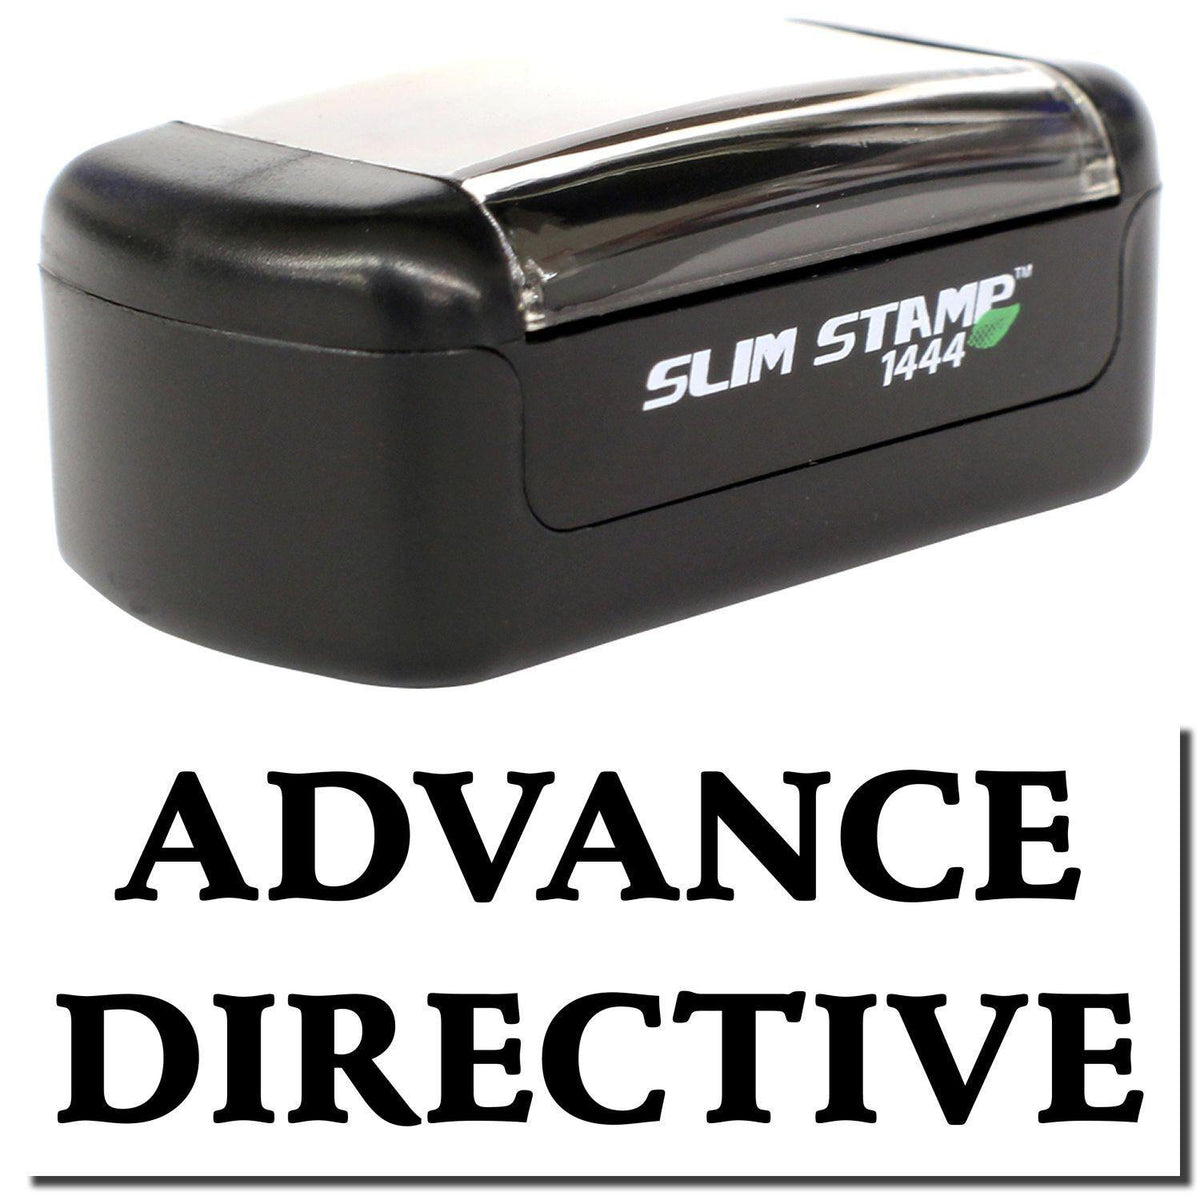 A stock office pre-inked stamp with a stamped image showing how the text &quot;ADVANCE DIRECTIVE&quot; is displayed after stamping.